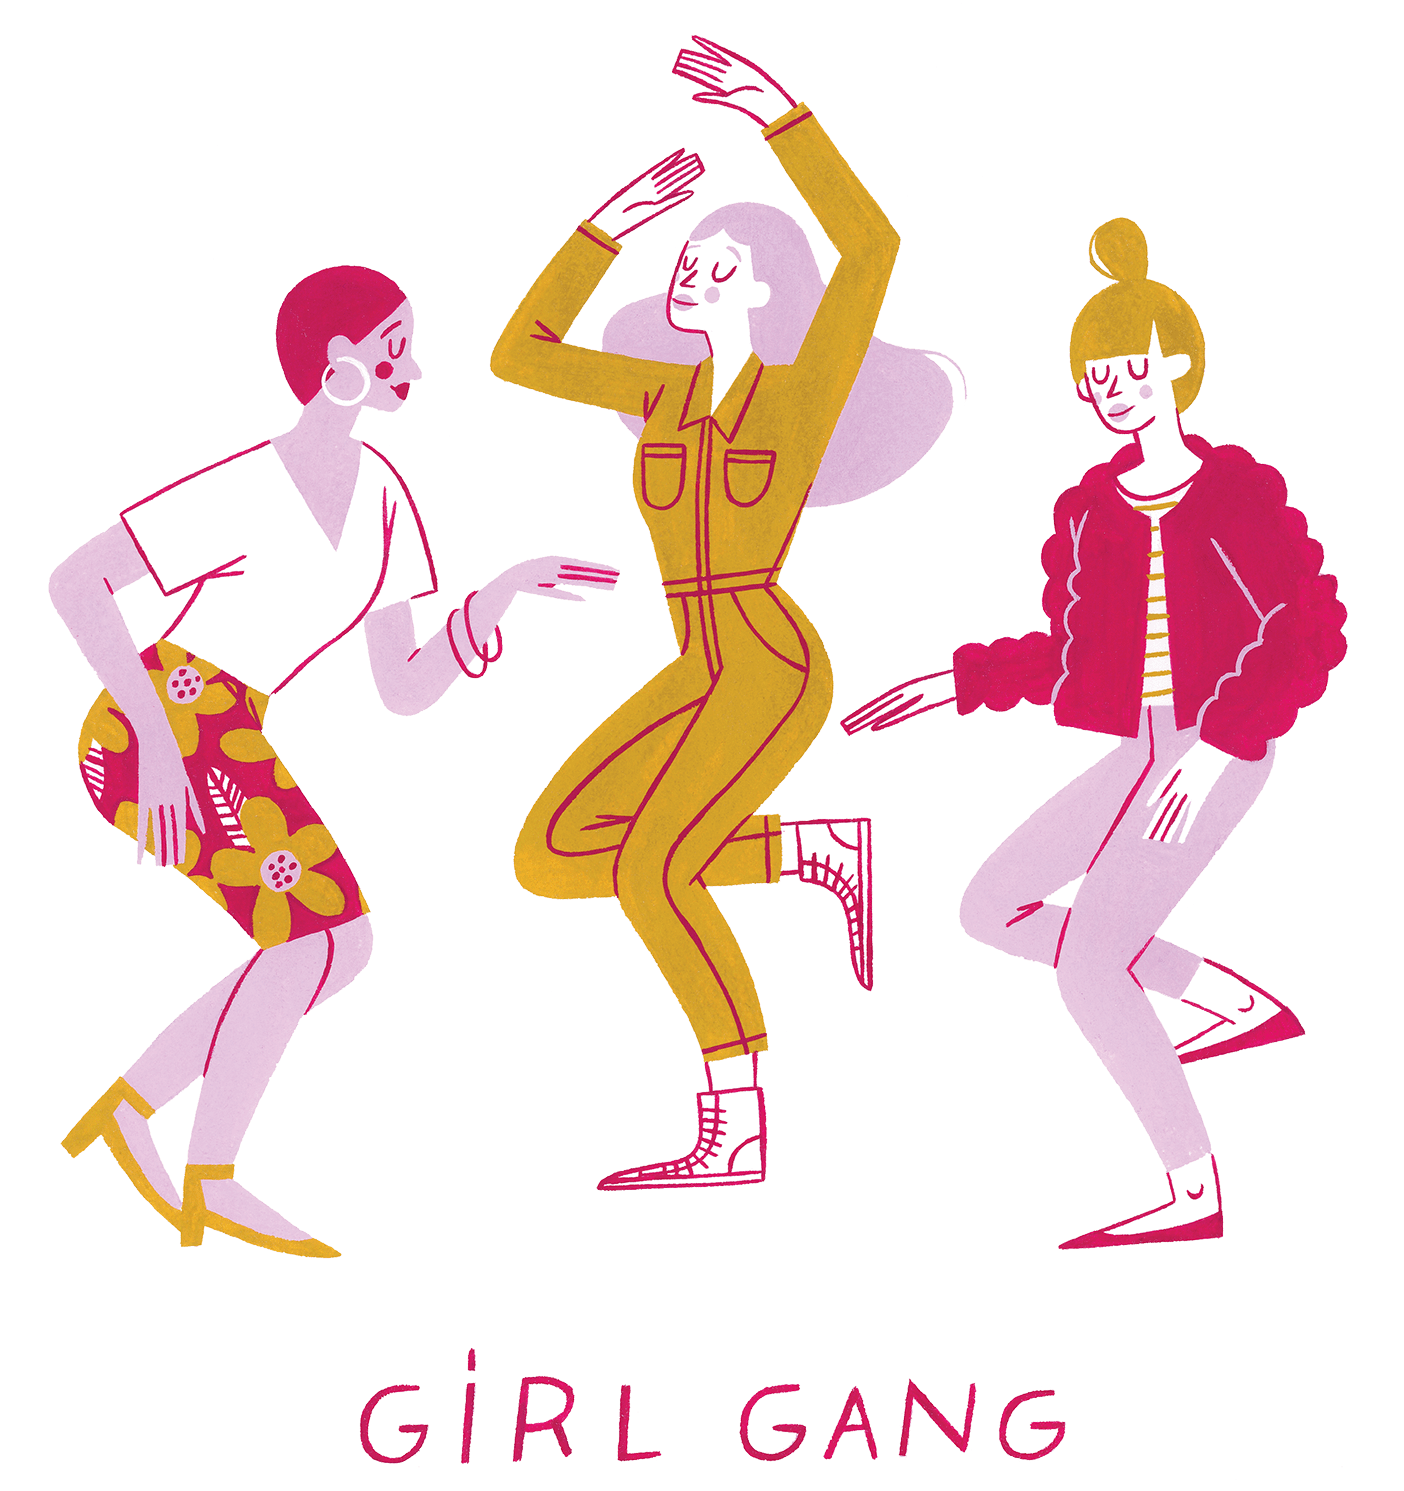 An illustration of three women dancing with the words "Girl Gang" below it.